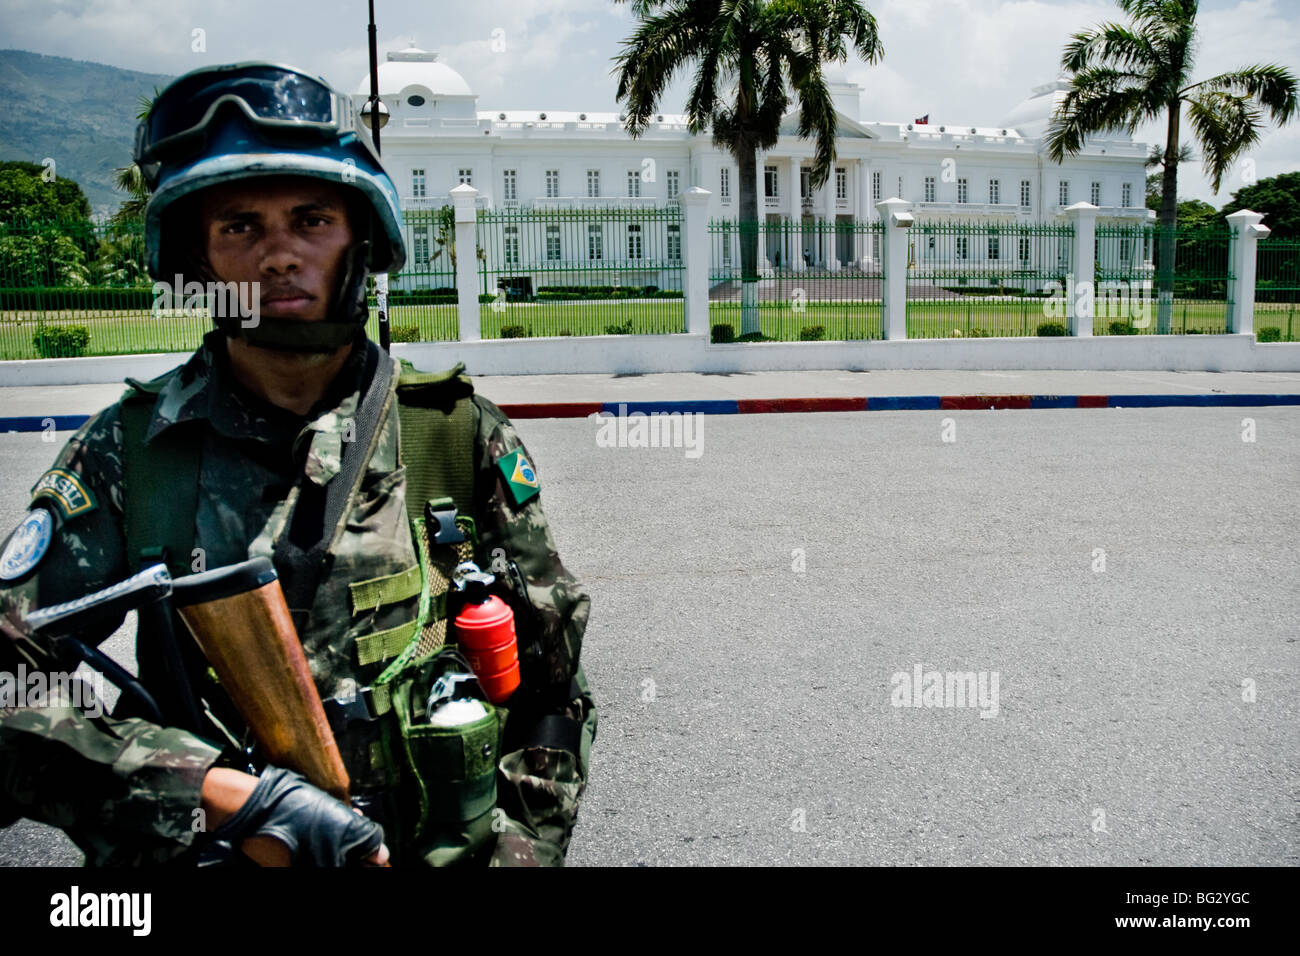 The UN soldier from Brazil guards the Presidential Palace in Port-au-Prince, Haiti. Stock Photo